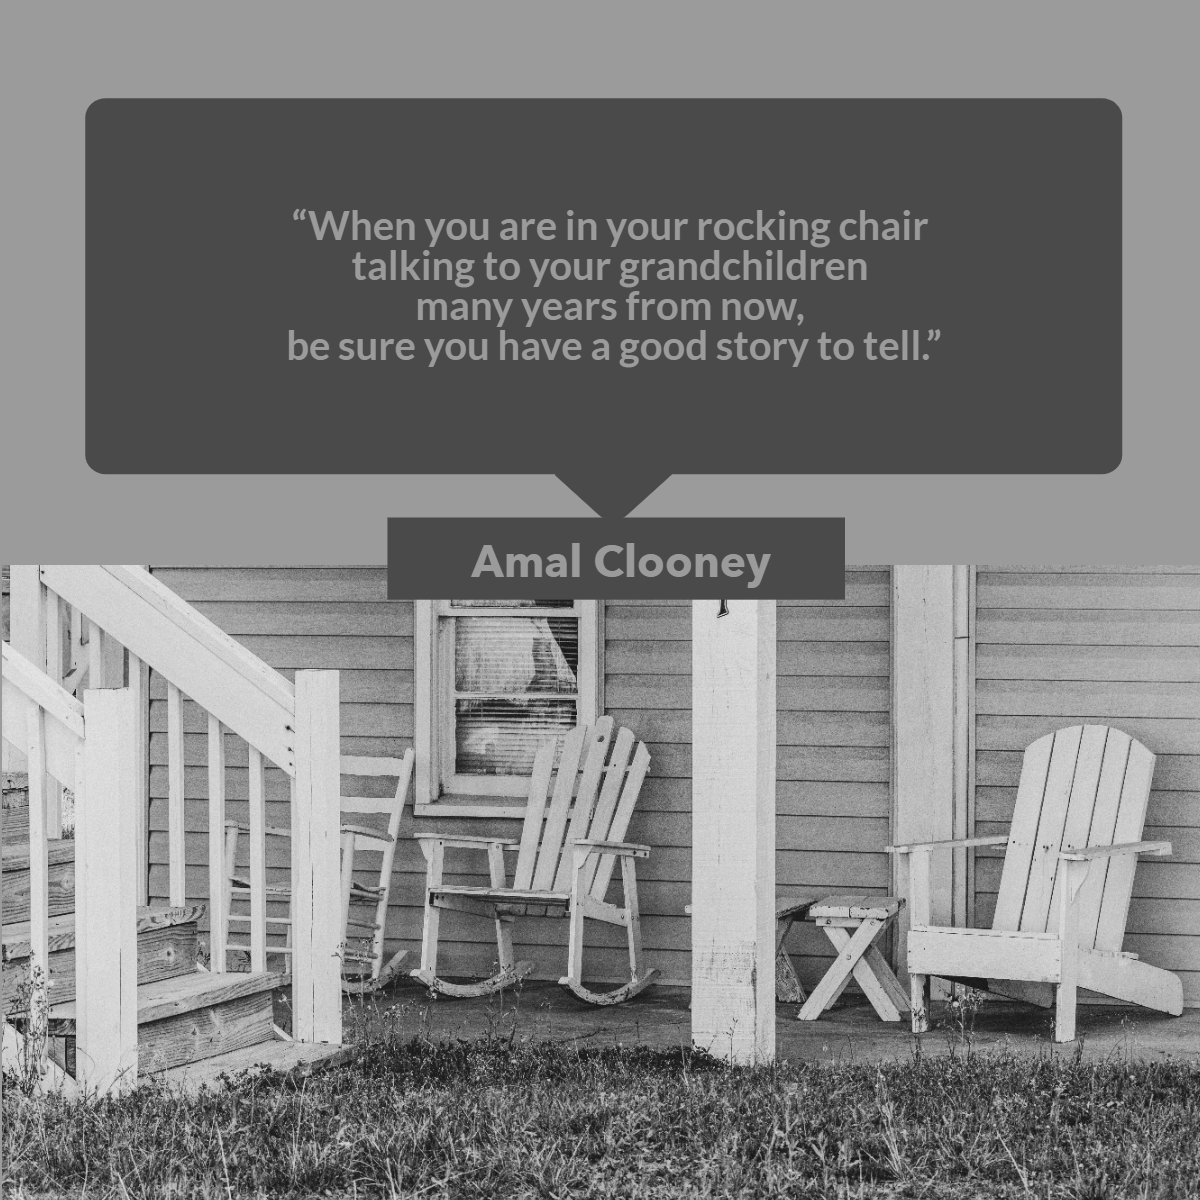 'When you are in your rocking chair talking to your grandchildren many years from now, be sure you have a good story to tell.' — Amal Clooney #Motivation #Inspirational #quoteoftheday✏️ #Success